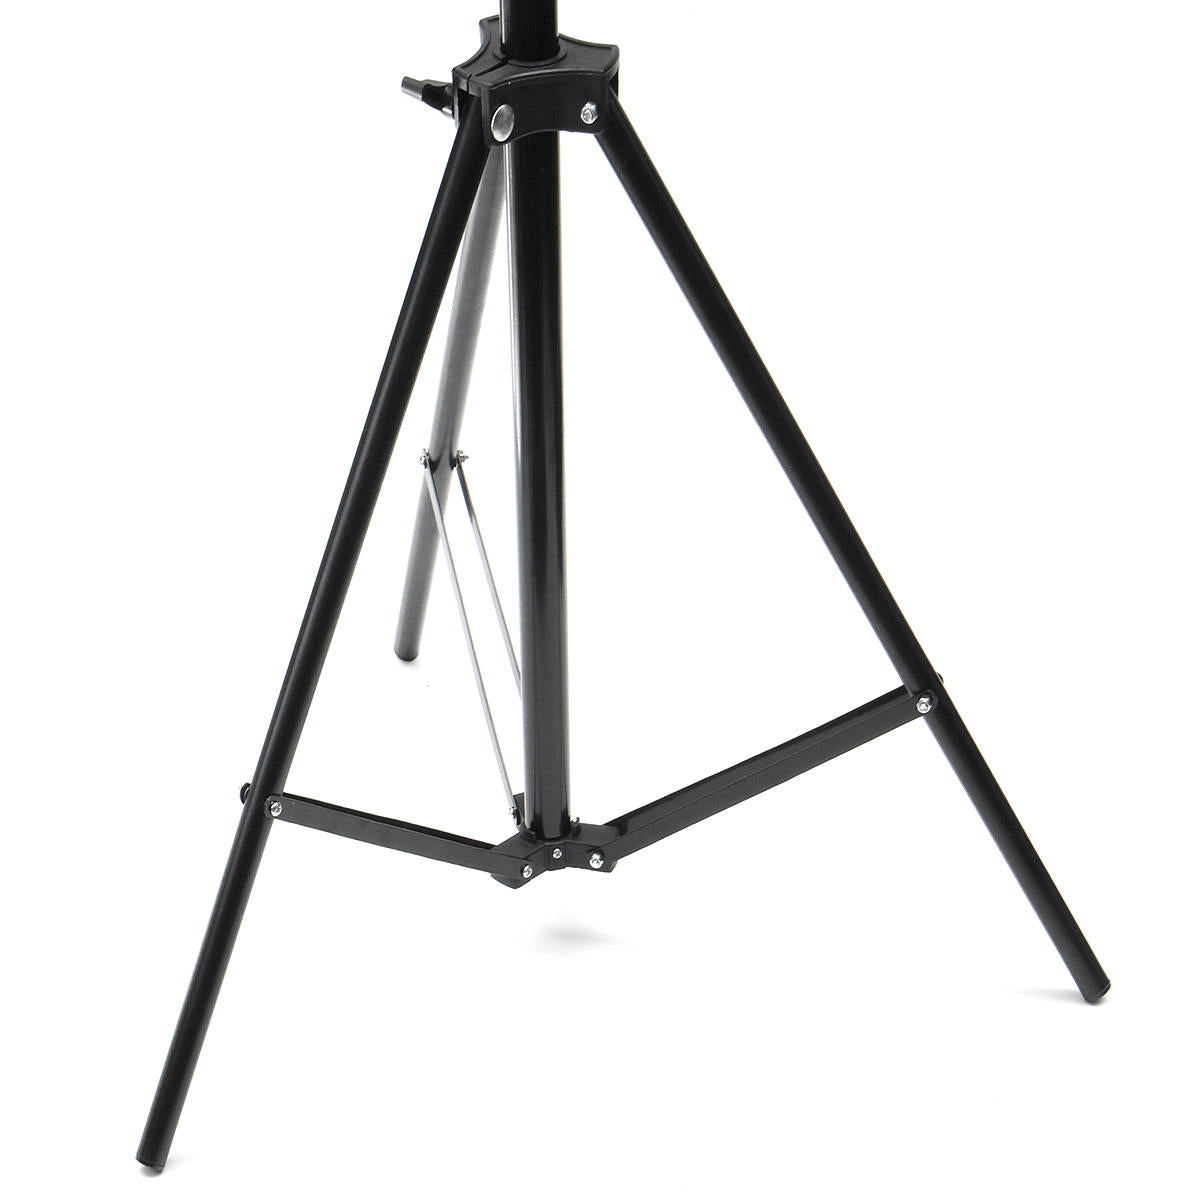 200*200cm Large Aluminium Photography Background Support Stand System Clips